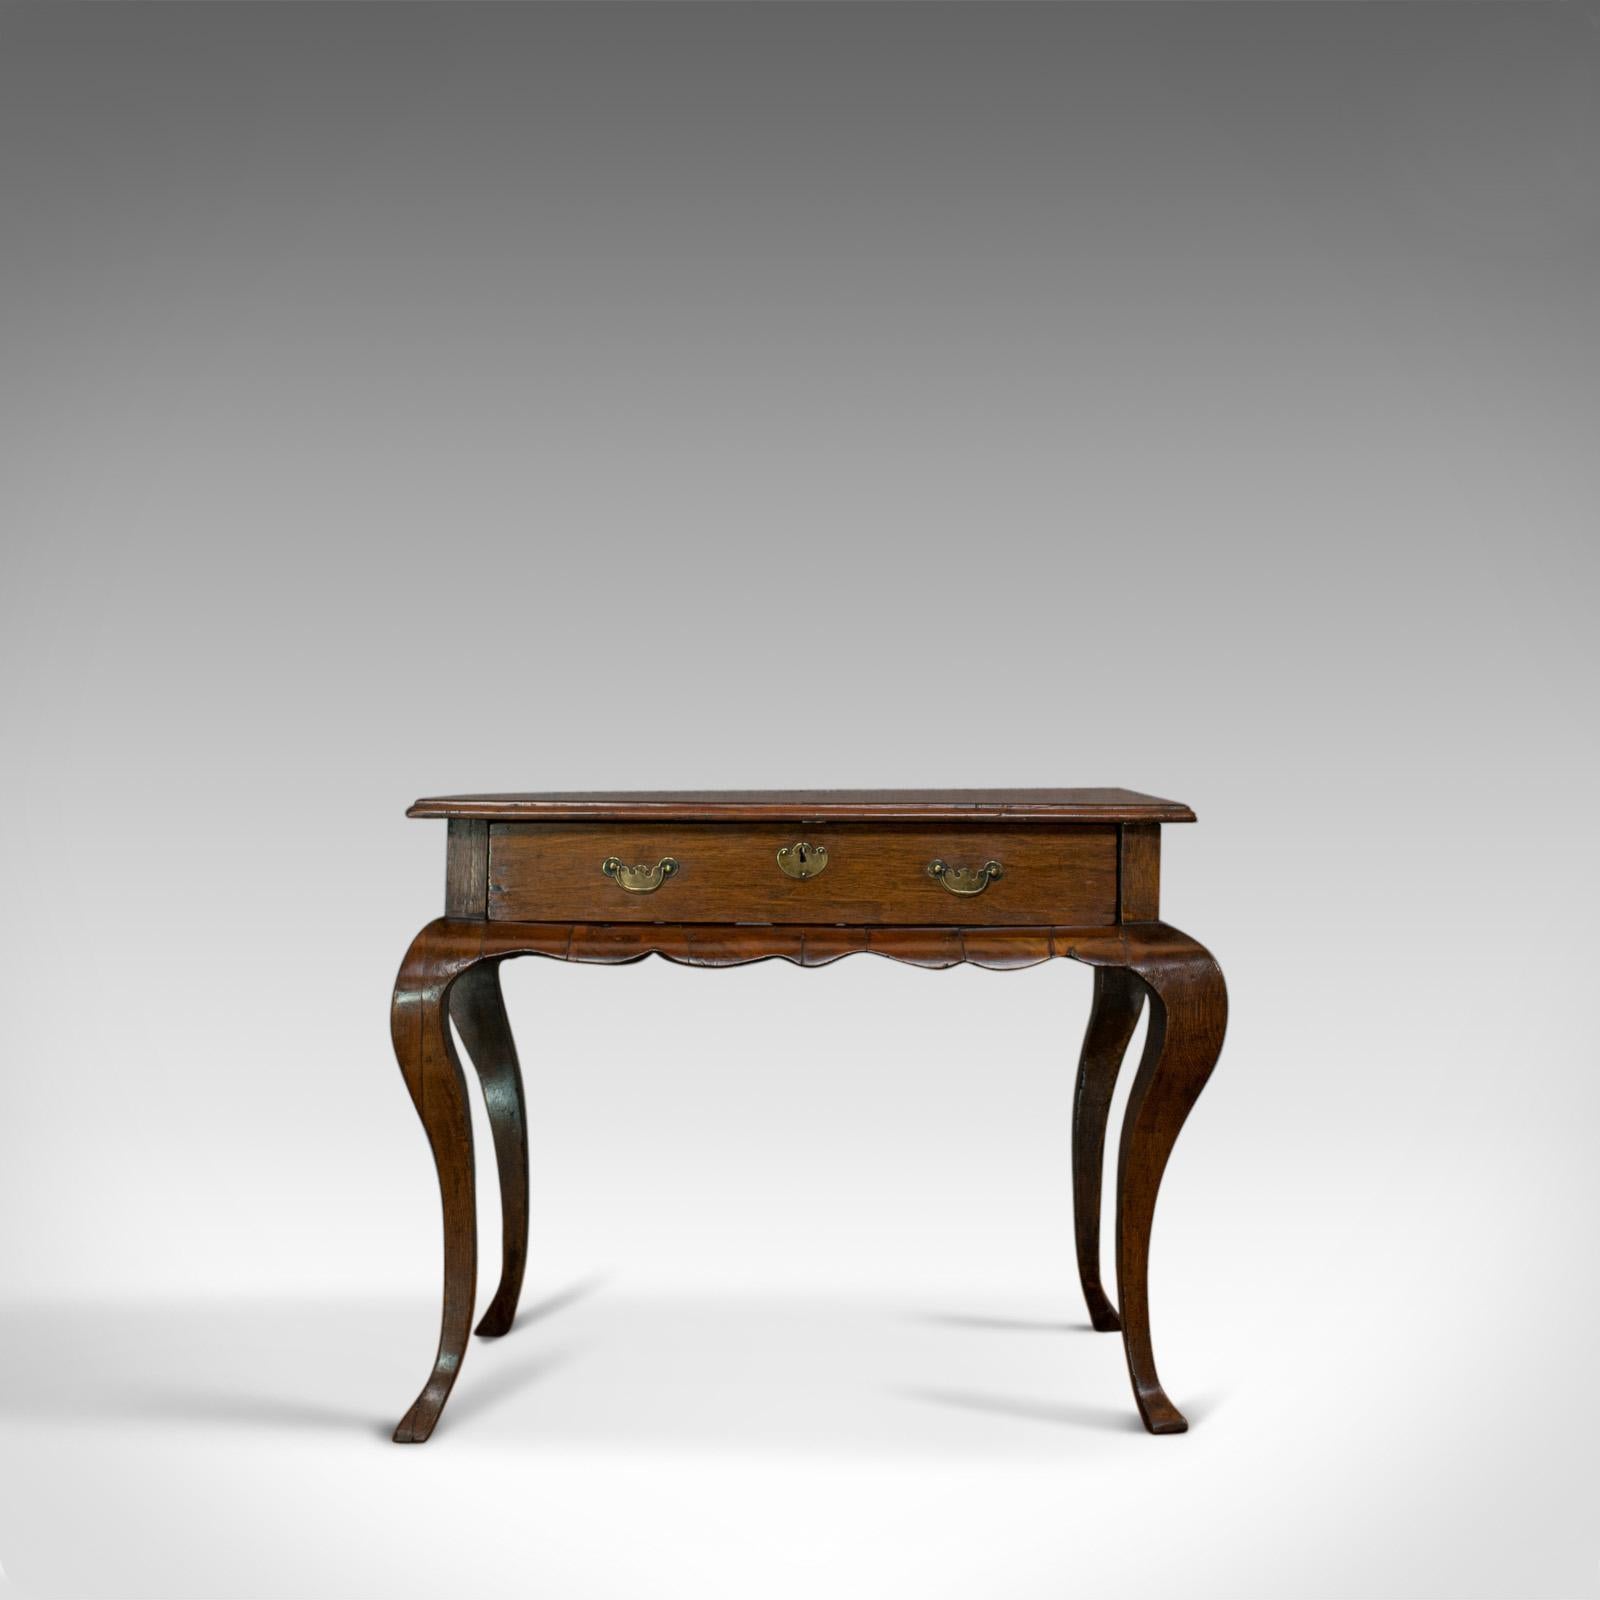 This is an antique centre table. A Flemish, mahogany and oak occasional table of overt Dutch taste and dating to the late 18th century, circa 1800.

Attractive serpentine form in select cuts of mahogany and oak
Fine grain interest and a desirable